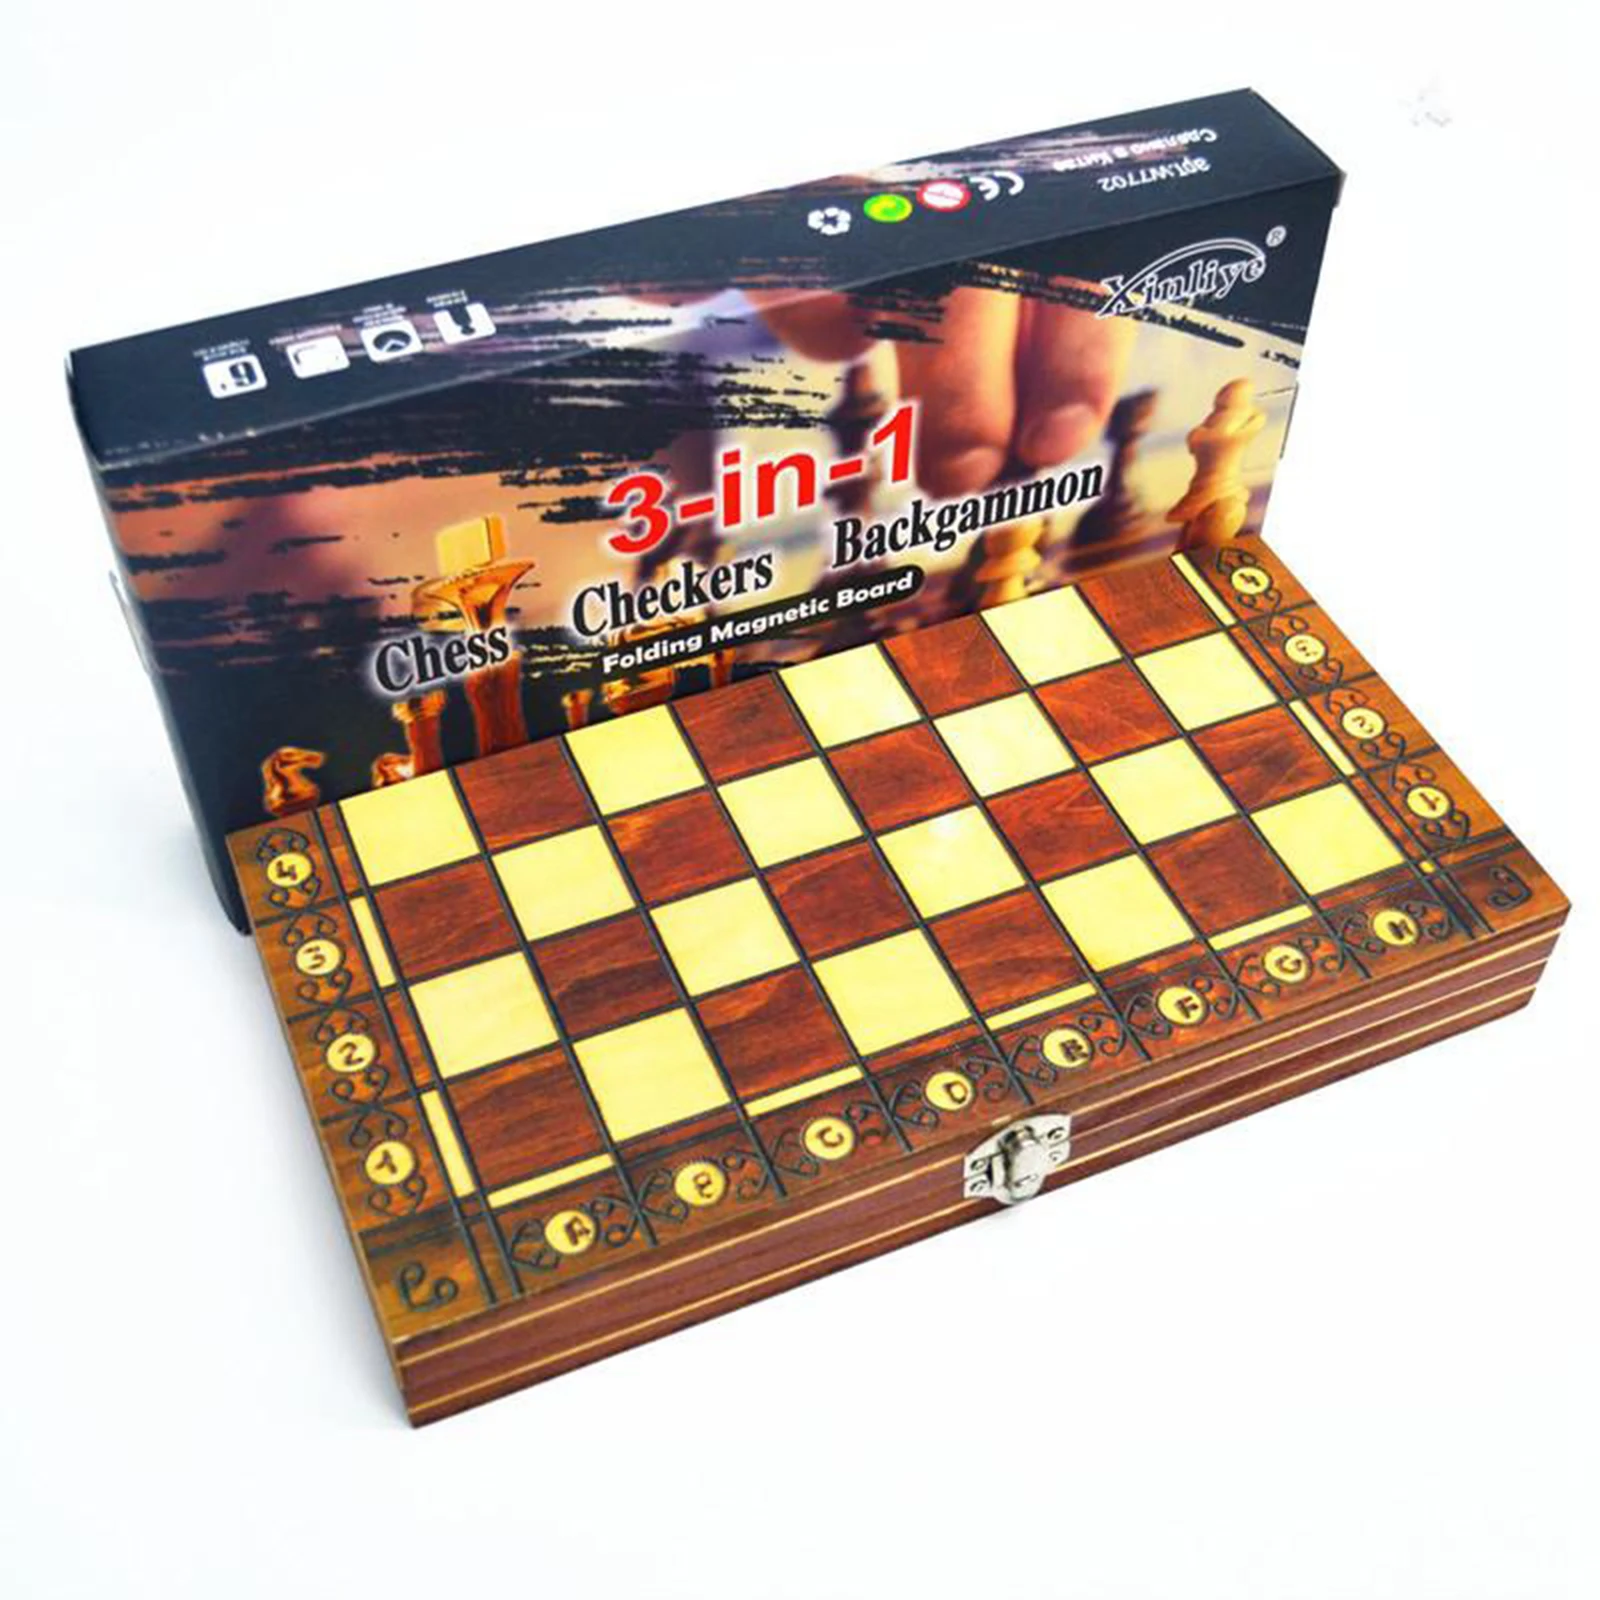 Kids Magnetic Wooden Chess Backgammon Checkers 3 in 1 Chess Game Toy Set 39cm